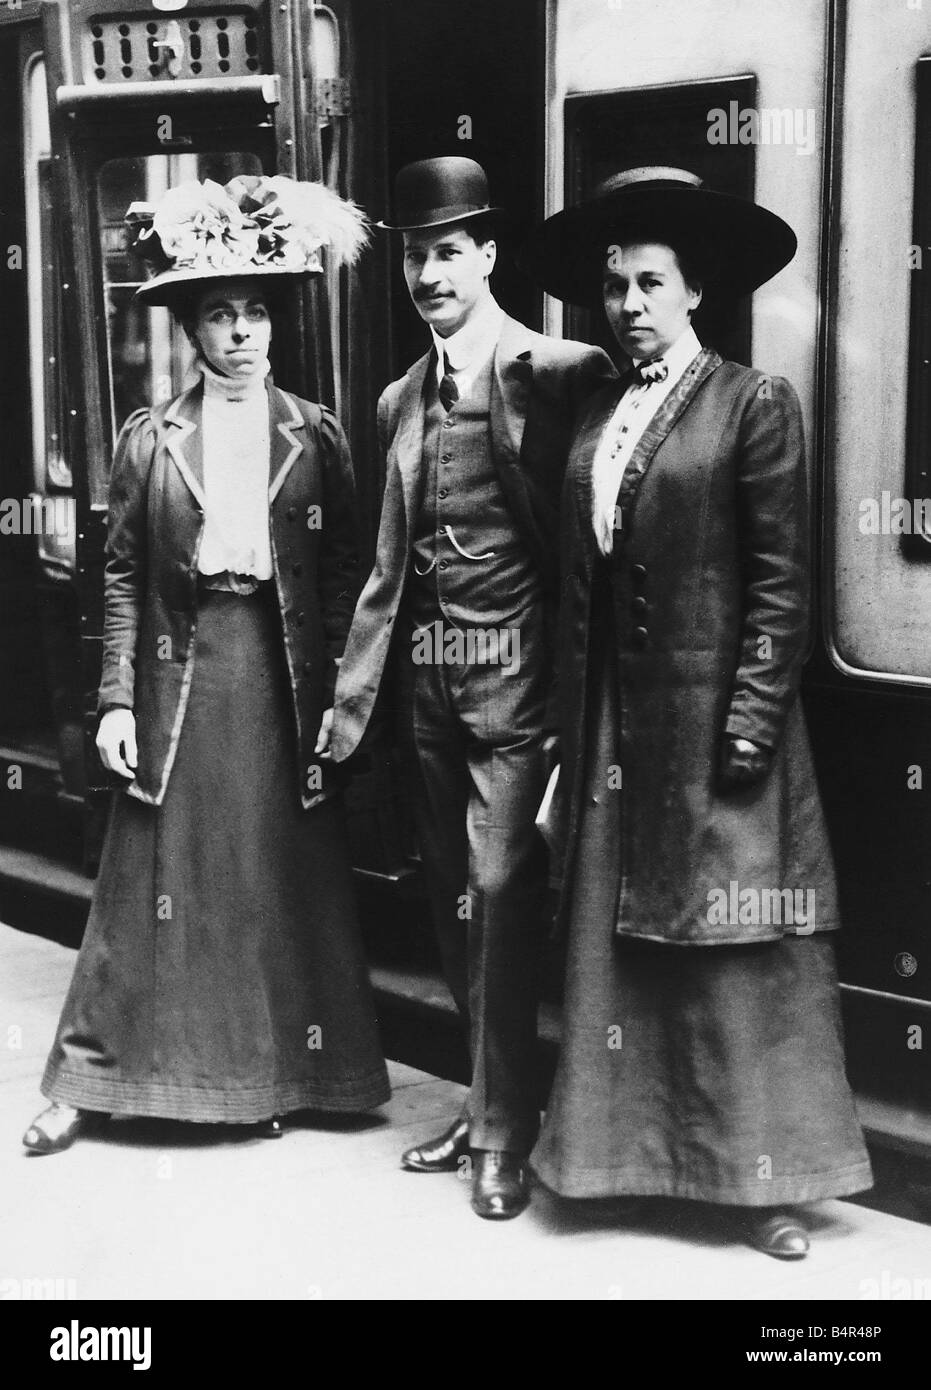 Miss Stone Detective Sergeant Mitchell and Miss Foster at Euston leaving for Canada to bring back Crippen and Ethel le Neve August 1910 American Hawley Harvey Crippen murdered his wife variety artist Belle Elmore and buried her remains in the cellar of his London home and escaped to America with Mistress Ethel le Neve He was the first criminal captured following a radio message and was hanged August 1910 Stock Photo